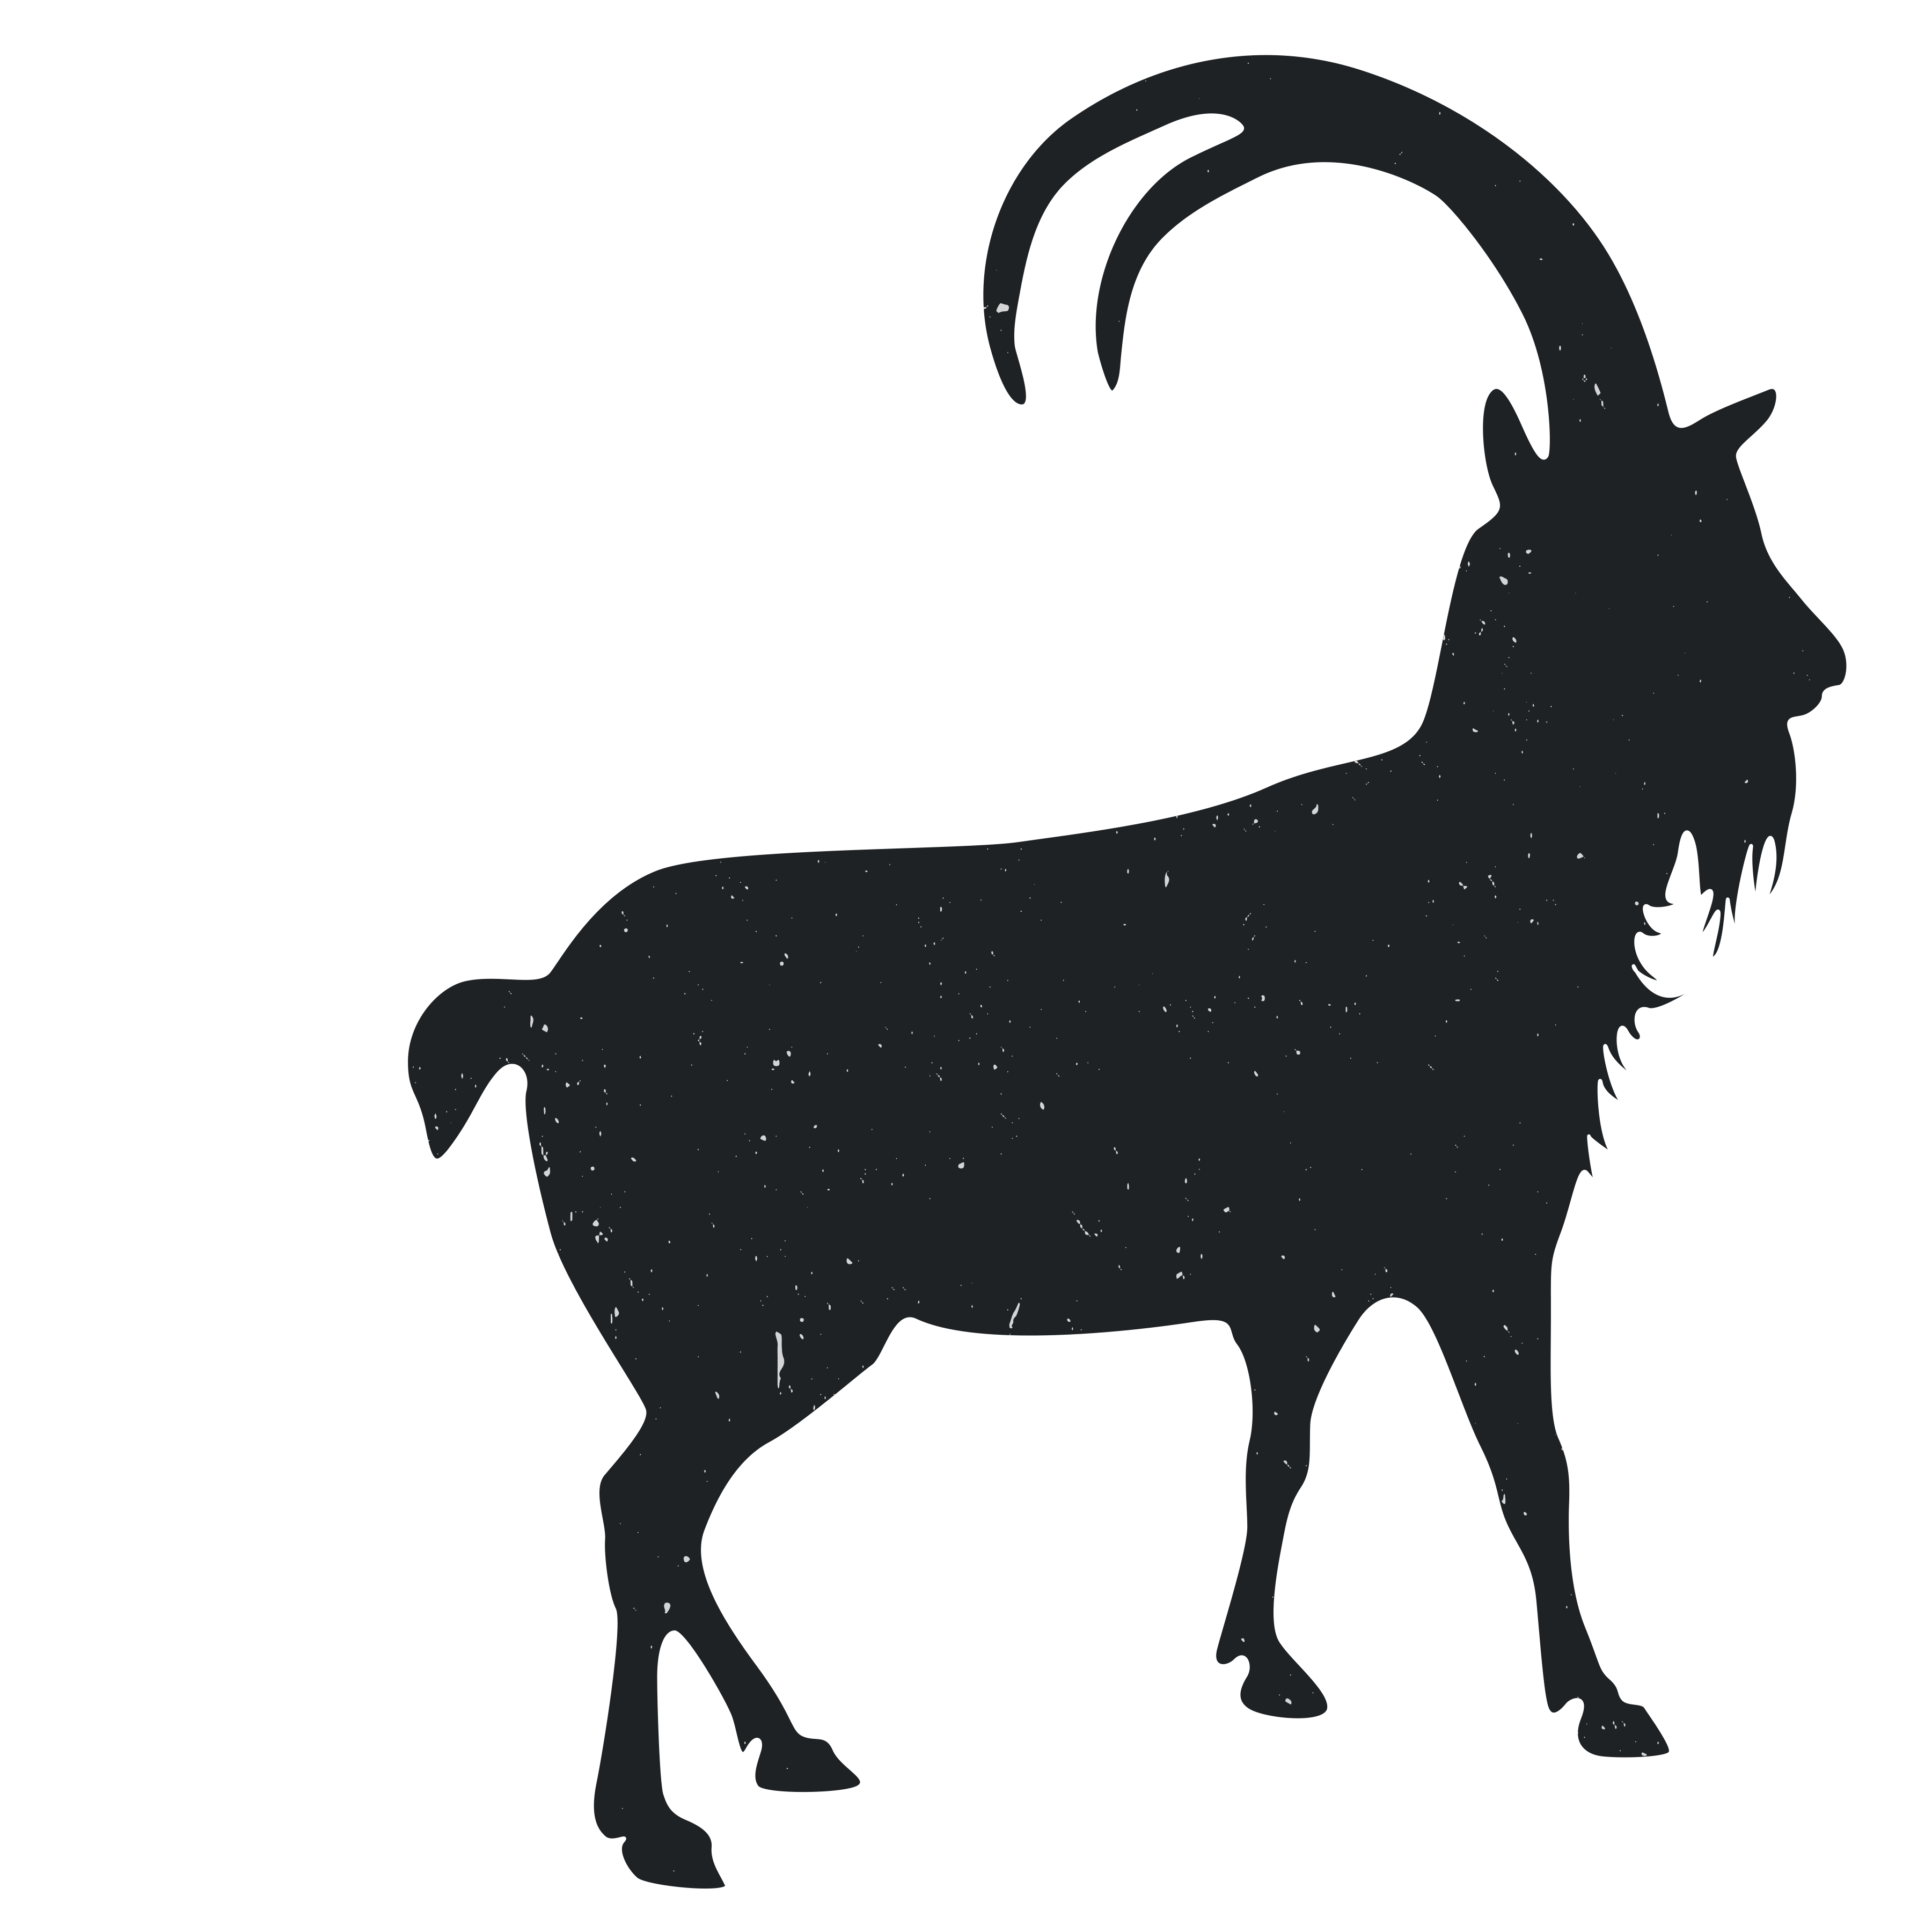 Mountain goat clipart clipart images gallery for free.